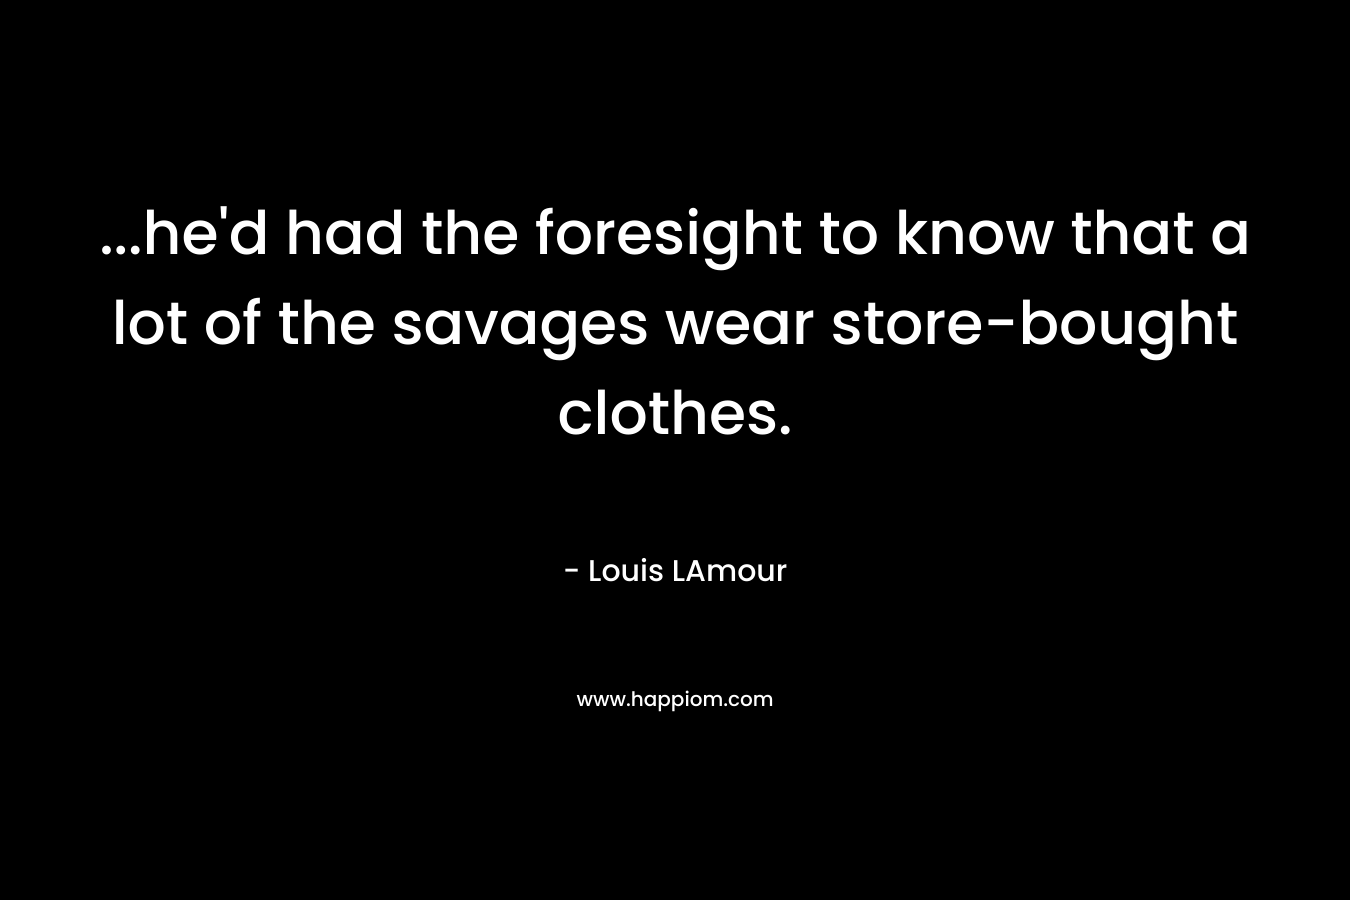 …he’d had the foresight to know that a lot of the savages wear store-bought clothes. – Louis LAmour